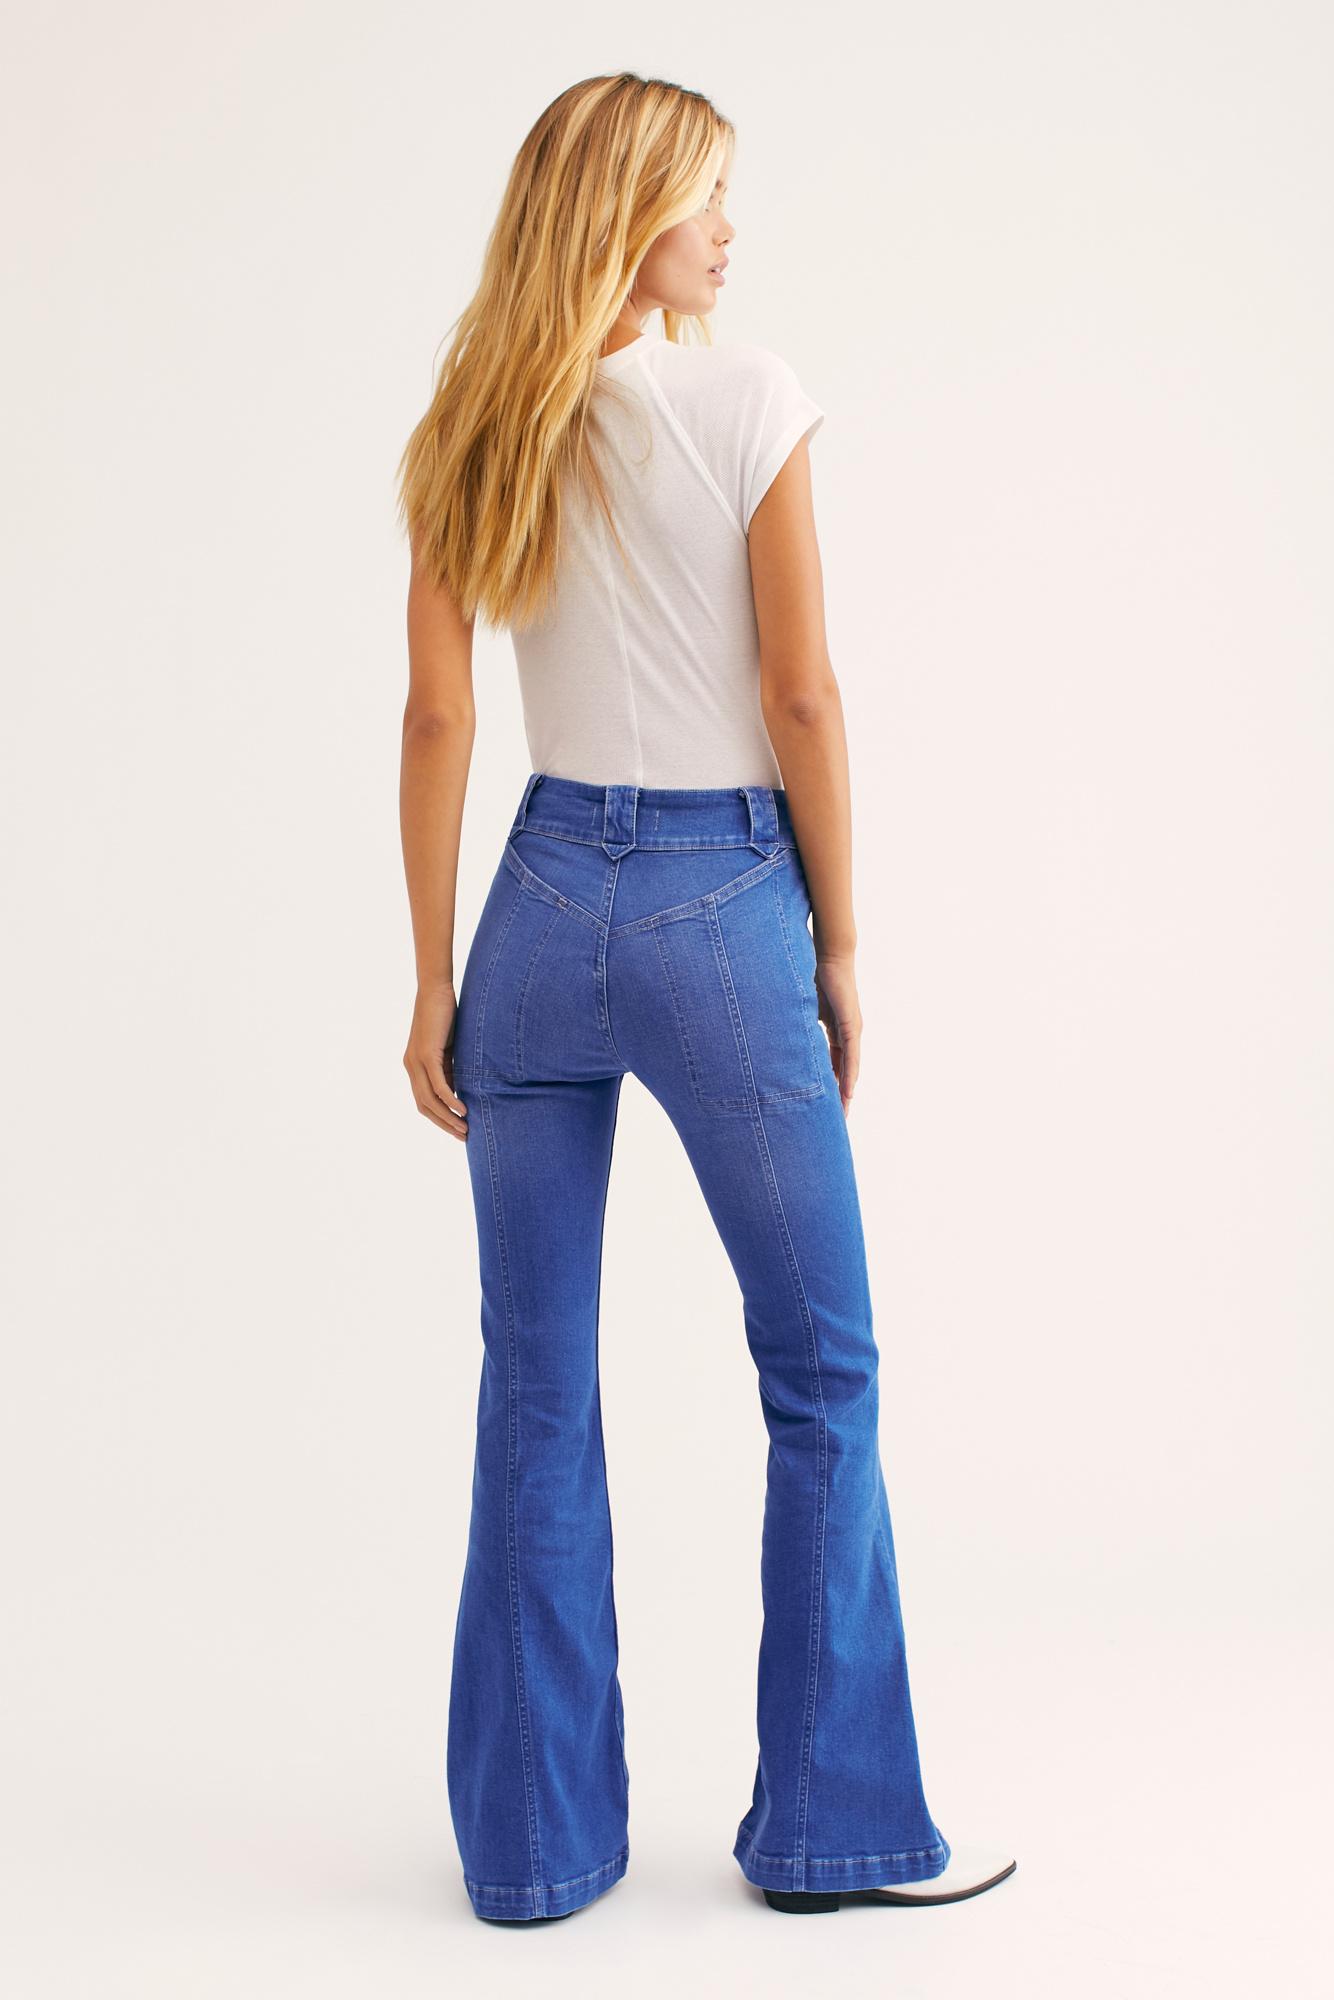 Free People Layla Flare Jeans By We The Free in Blue